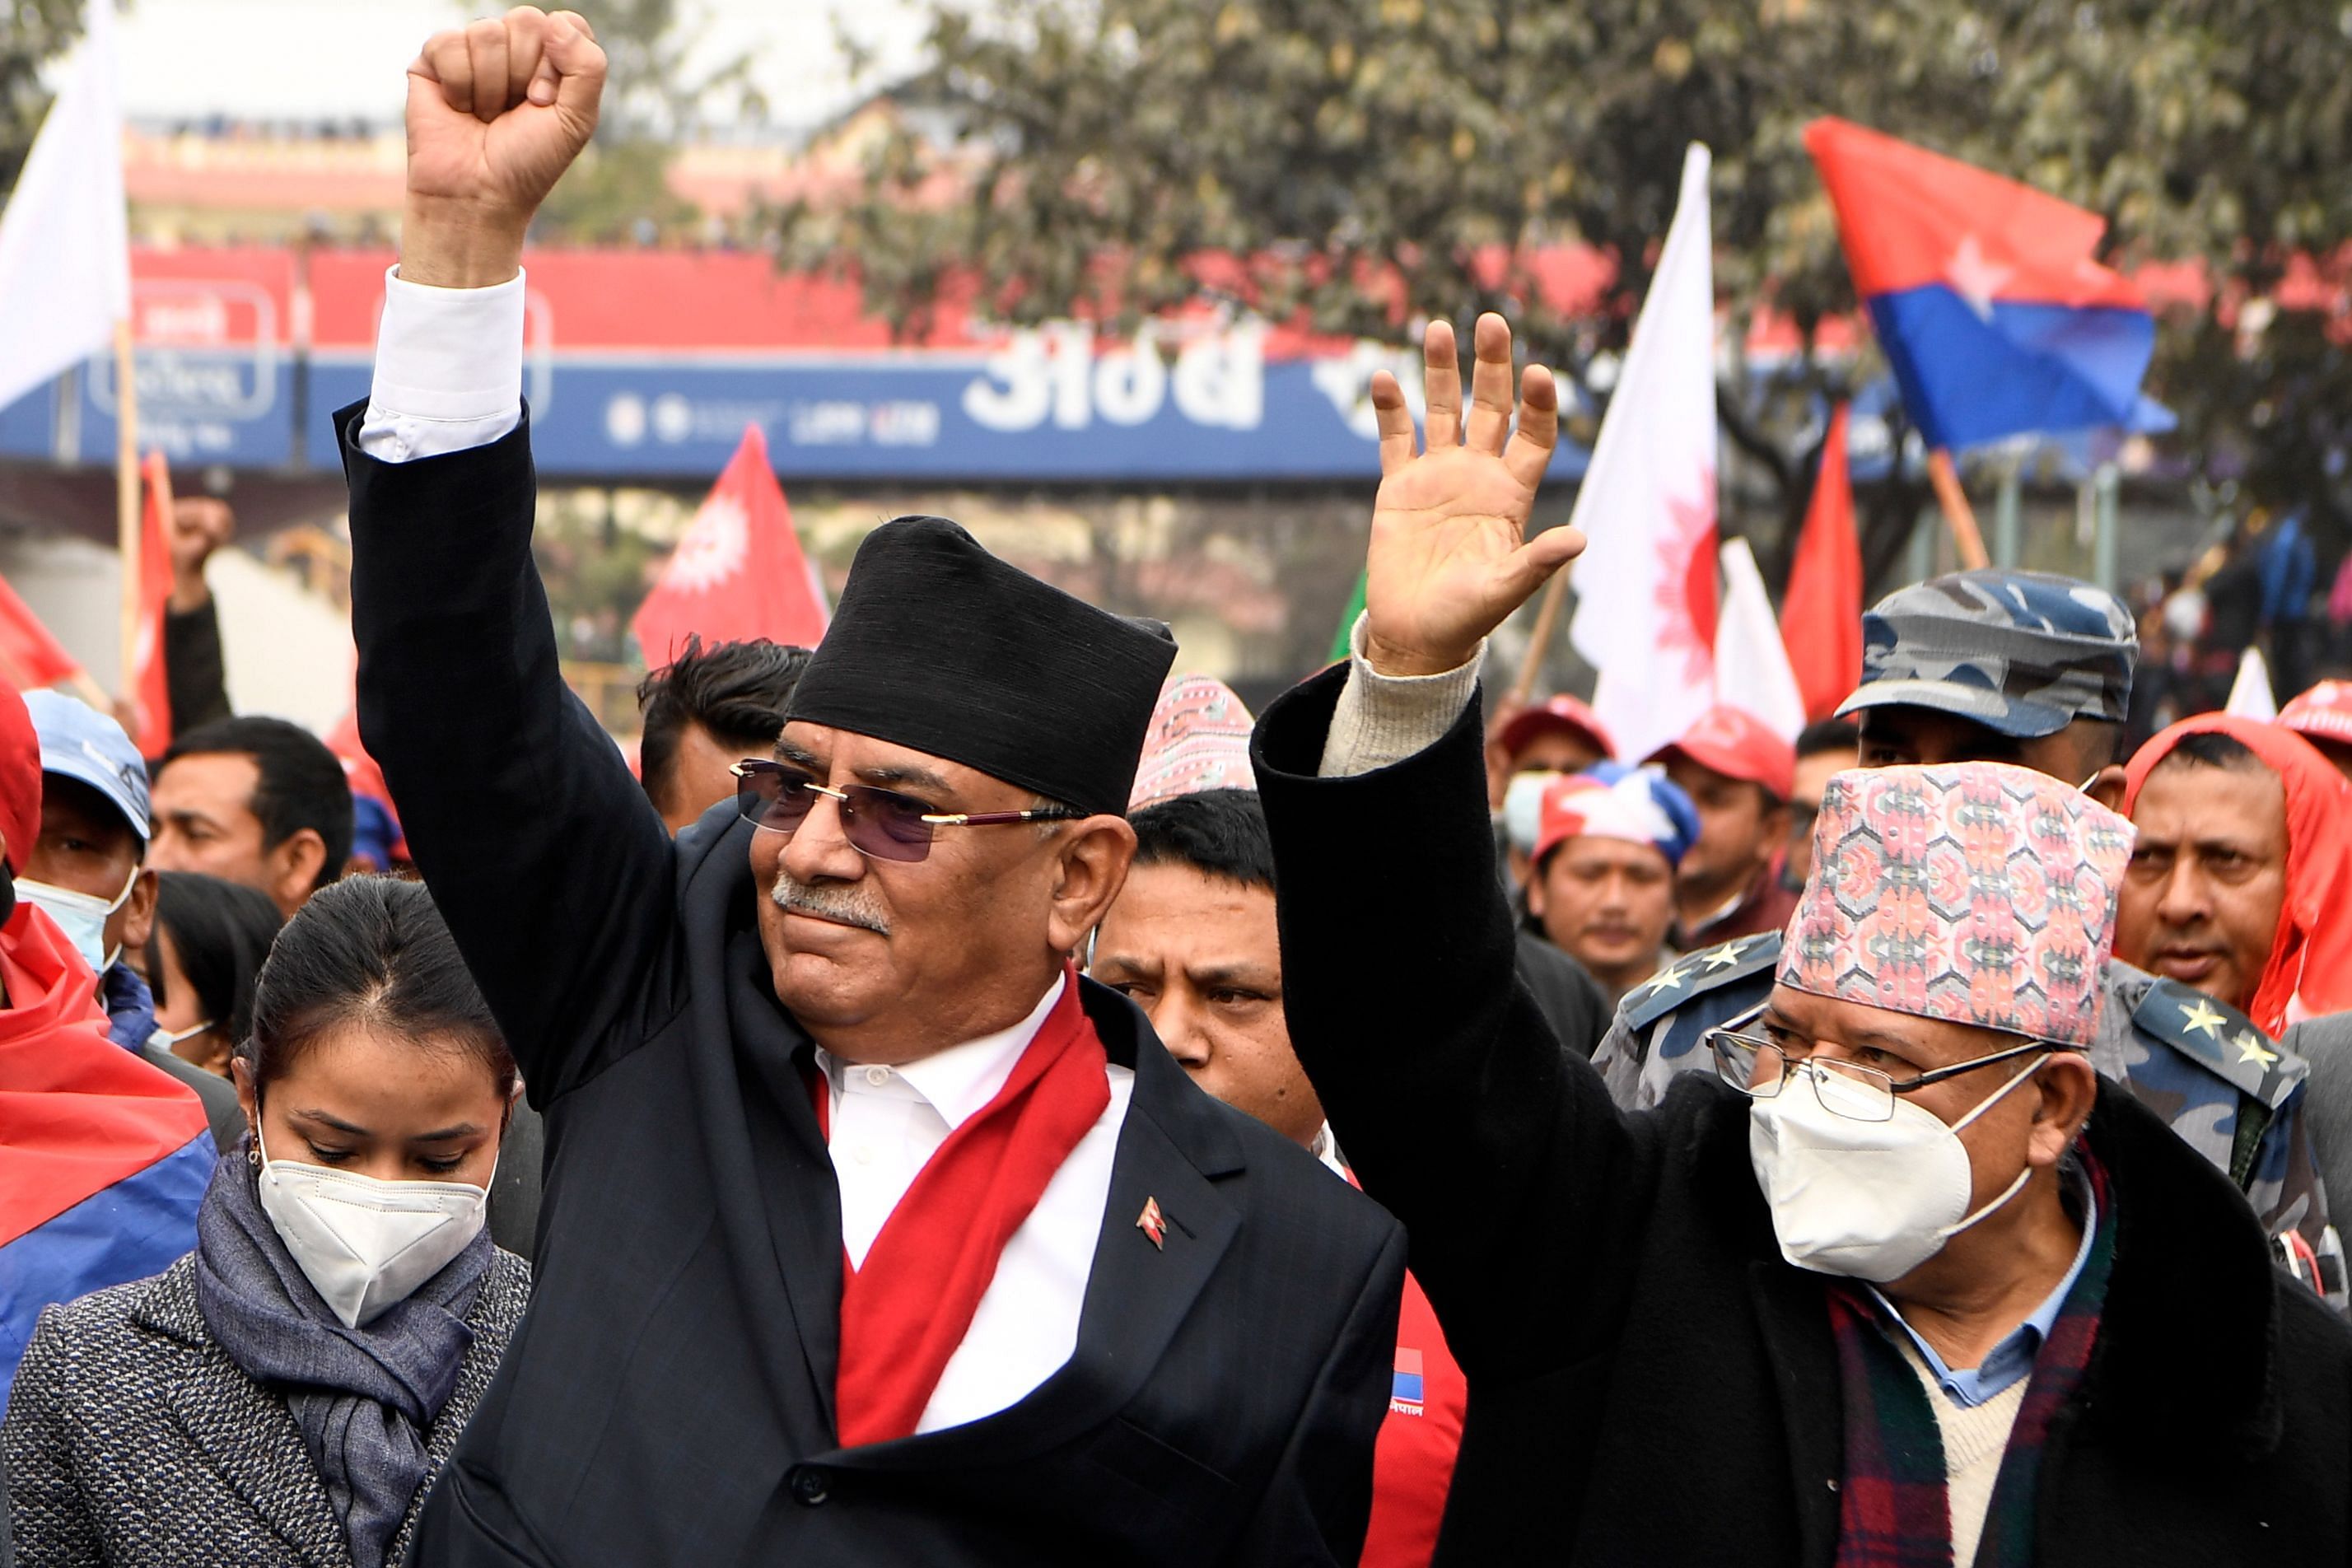 Dissident leaders of the Nepal Communist Party (NCP) Pushpa Kamal Dahal (L), also known as Prachanda and Madhav Kumar Nepal (R) participate in a rally to protest against the dissolution of the country's parliament in Kathmandu. Credit: AFP